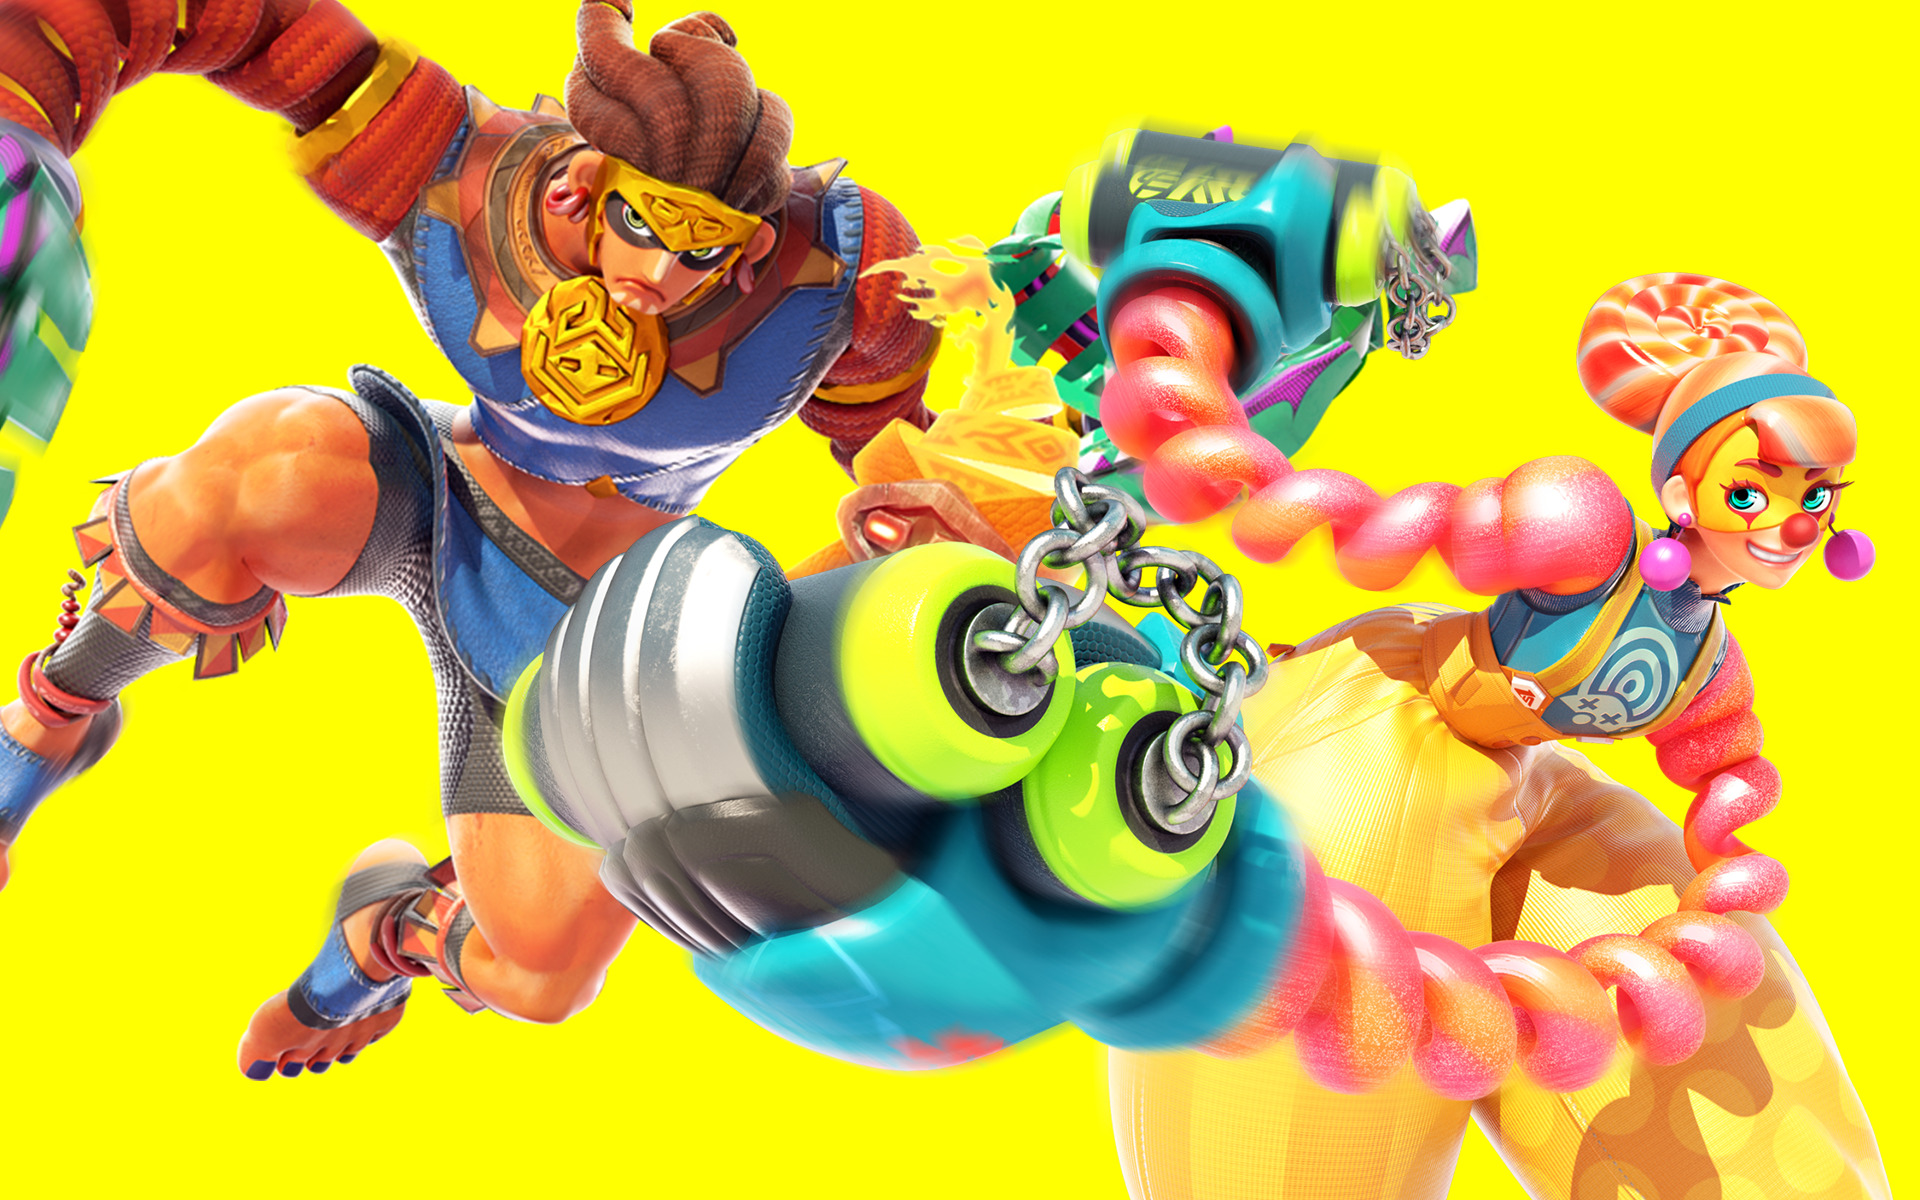 Lola Pop, Misango square off in next ARMS Party Crash - Nintendo Wire